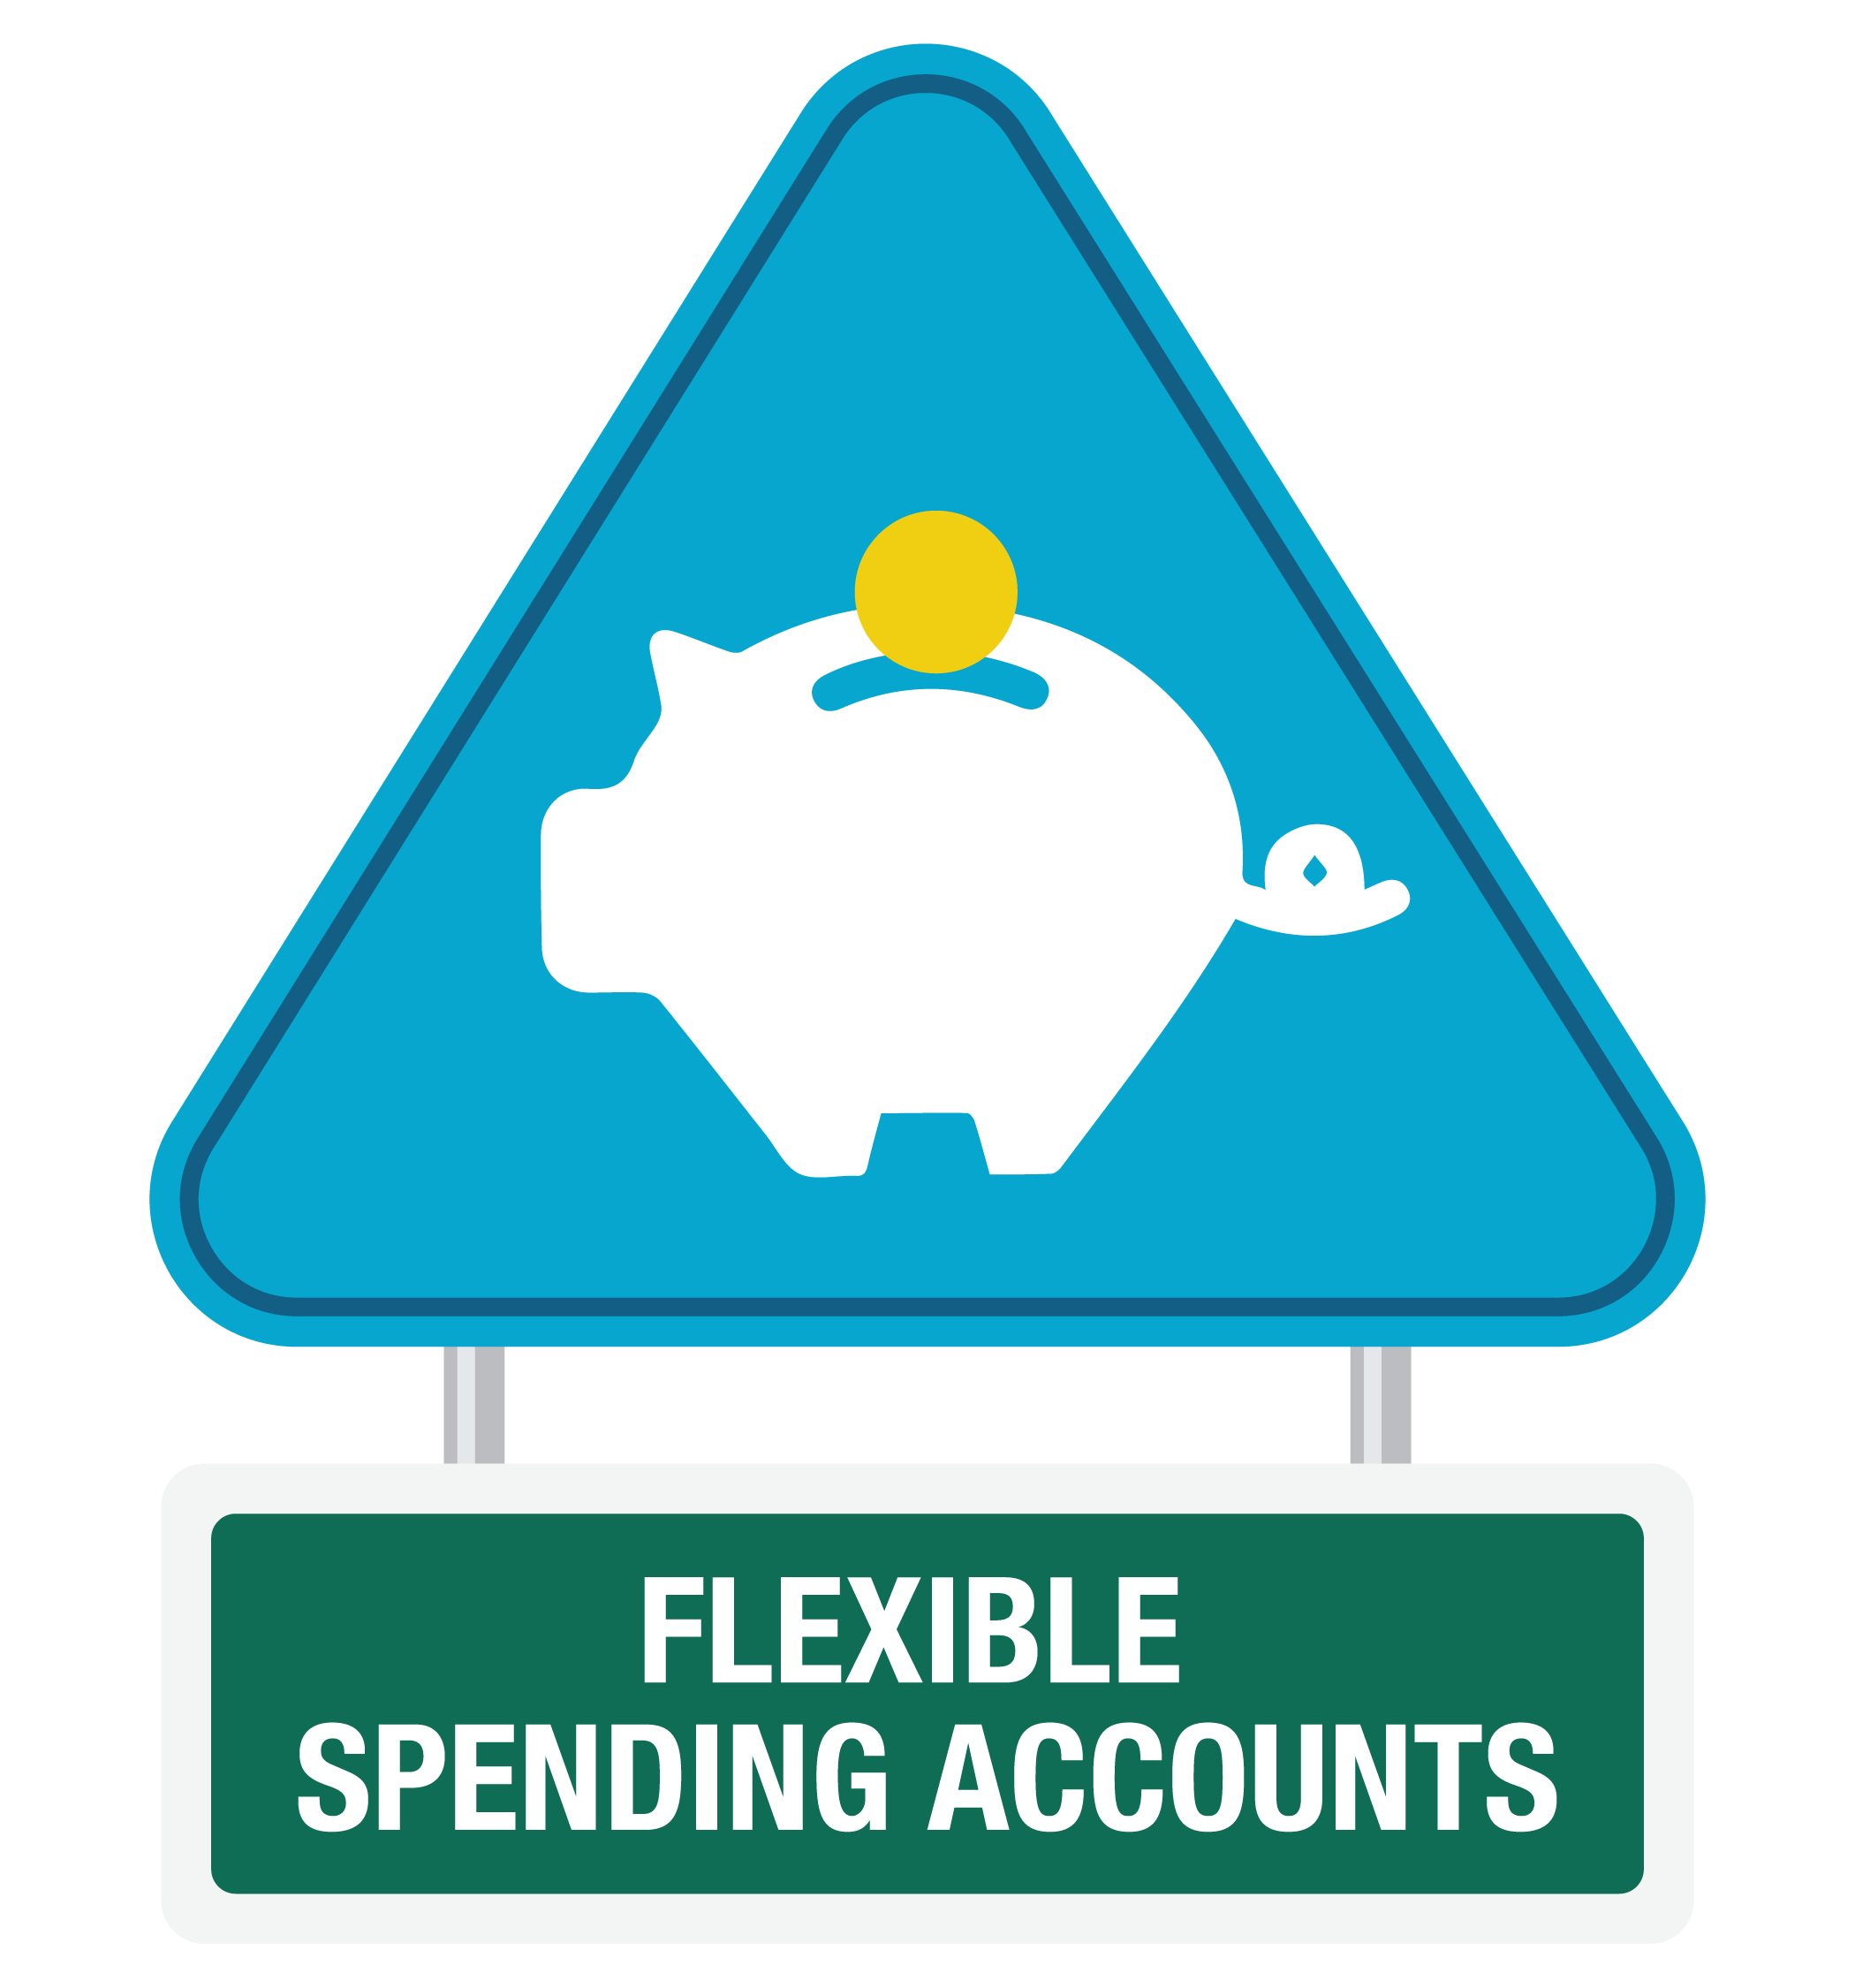 Click for details on Flexible Spending Accounts